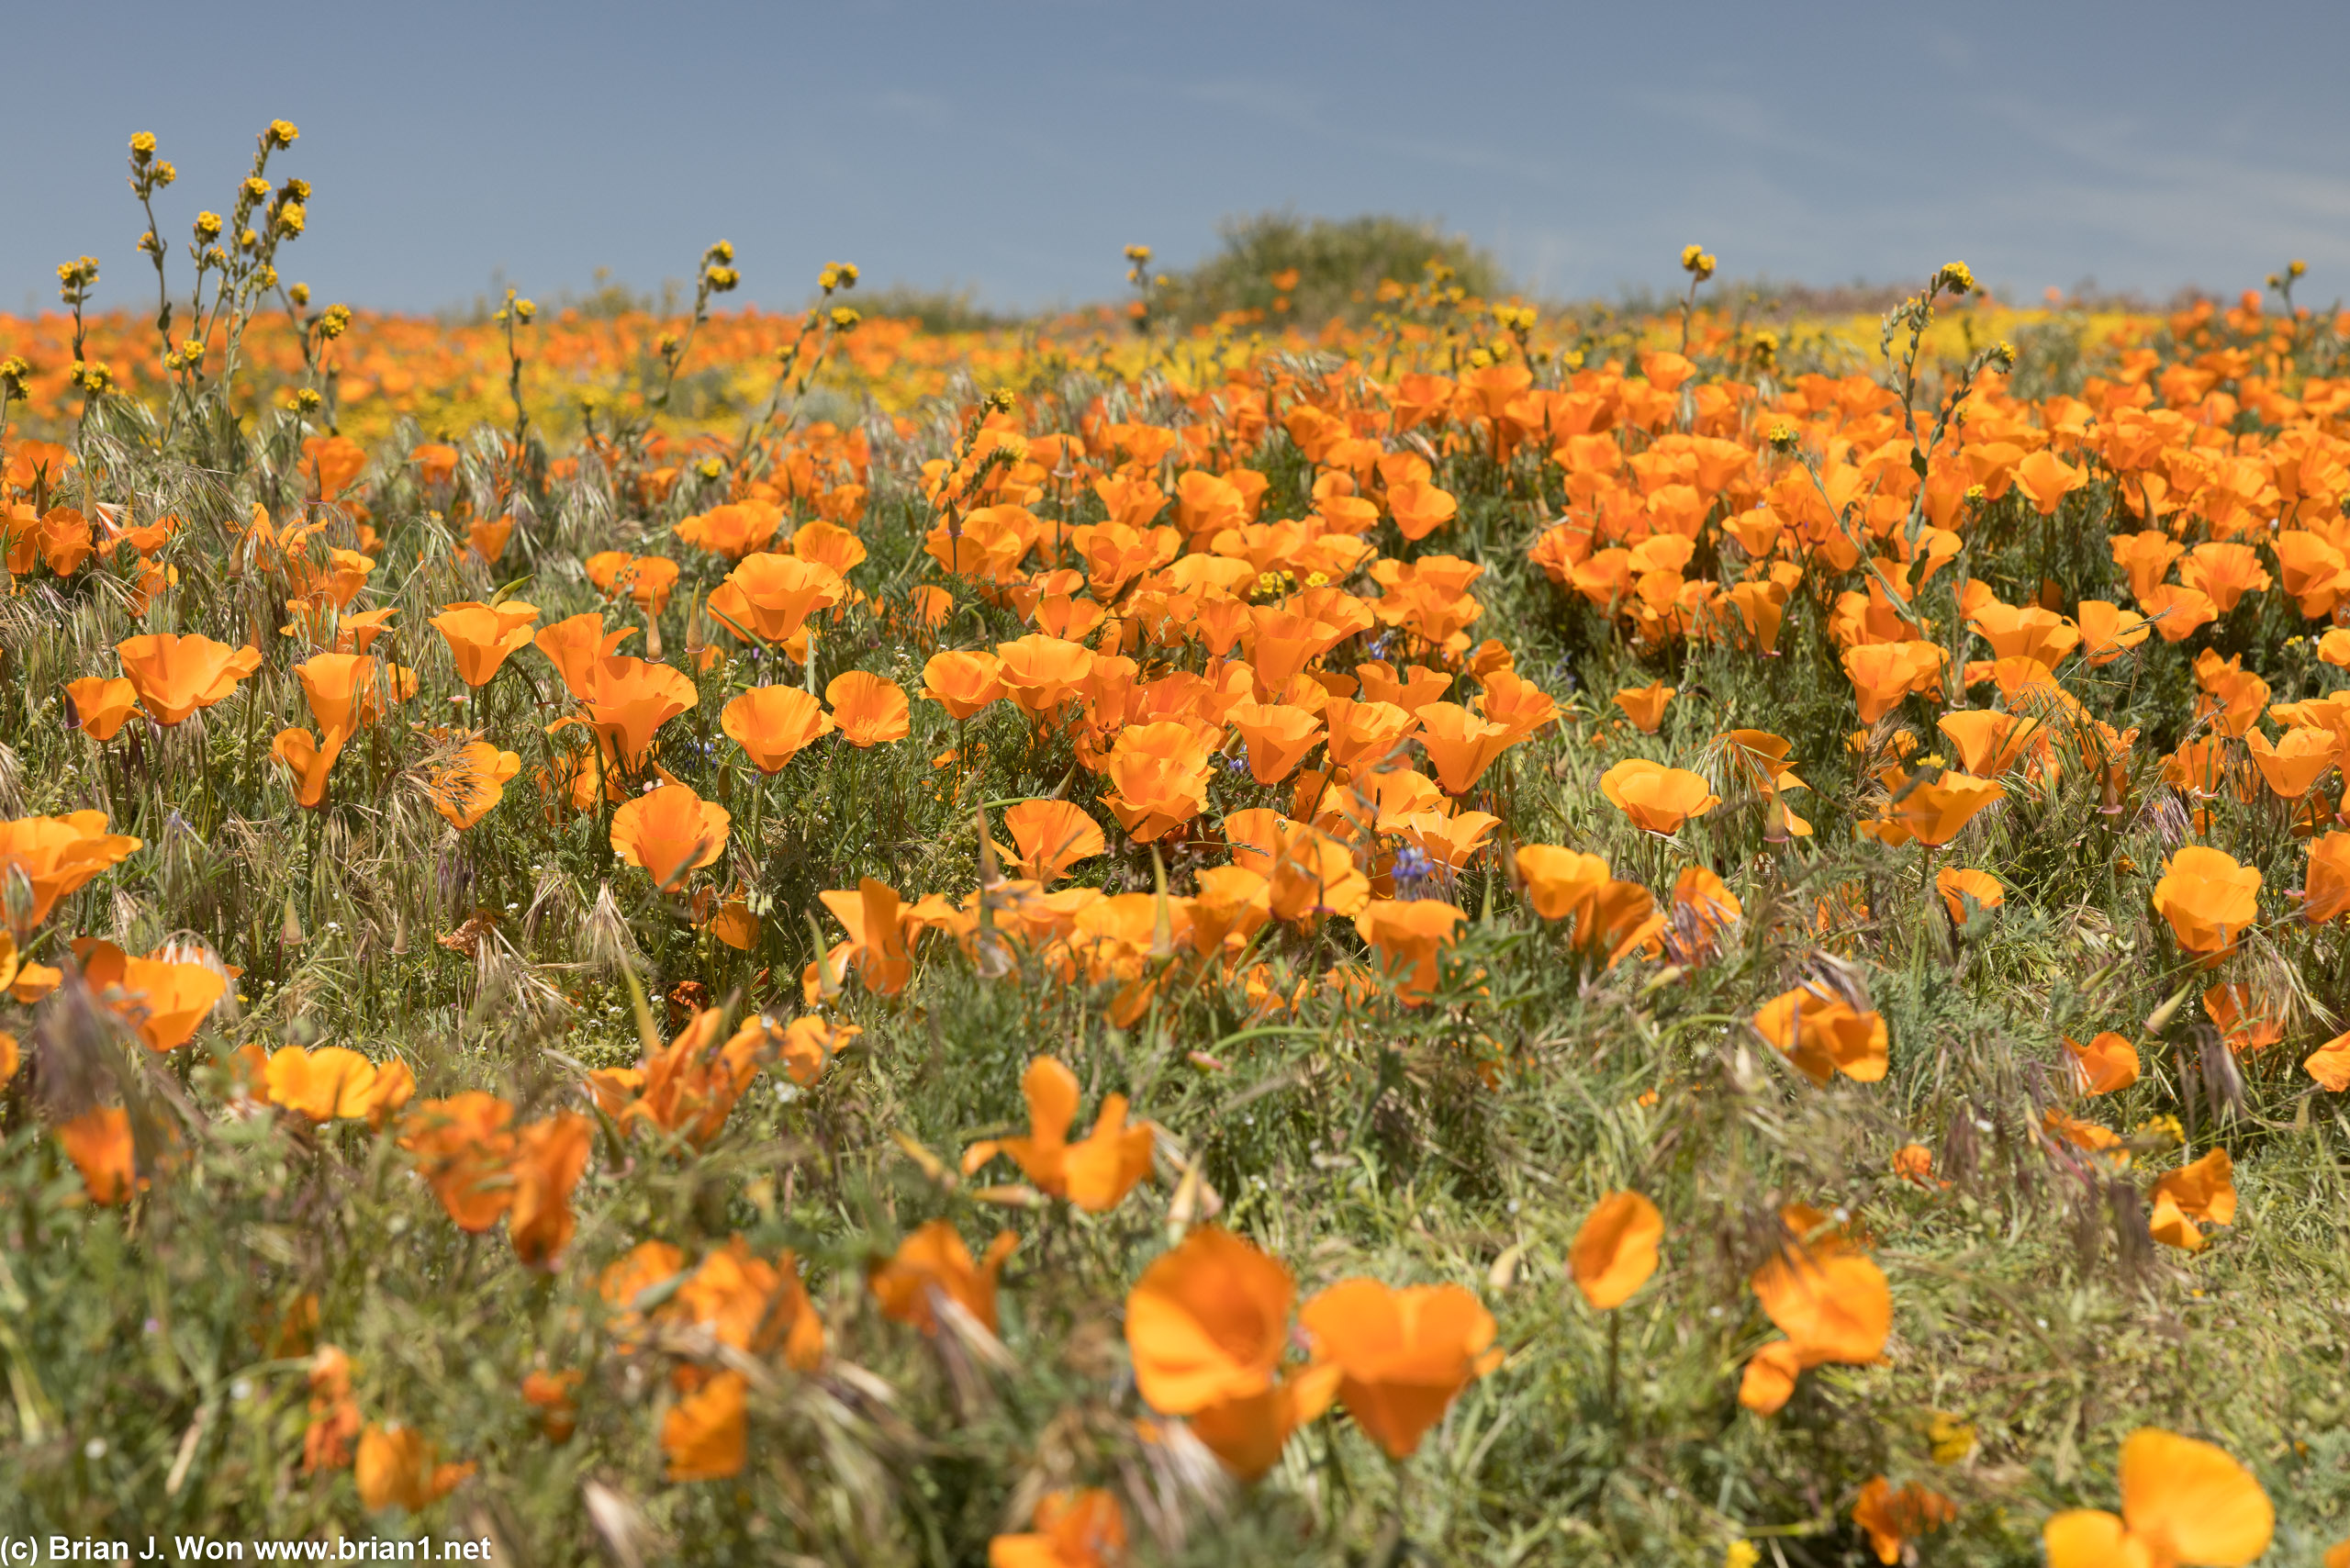 This was about as good as it got for my California poppy search this season.